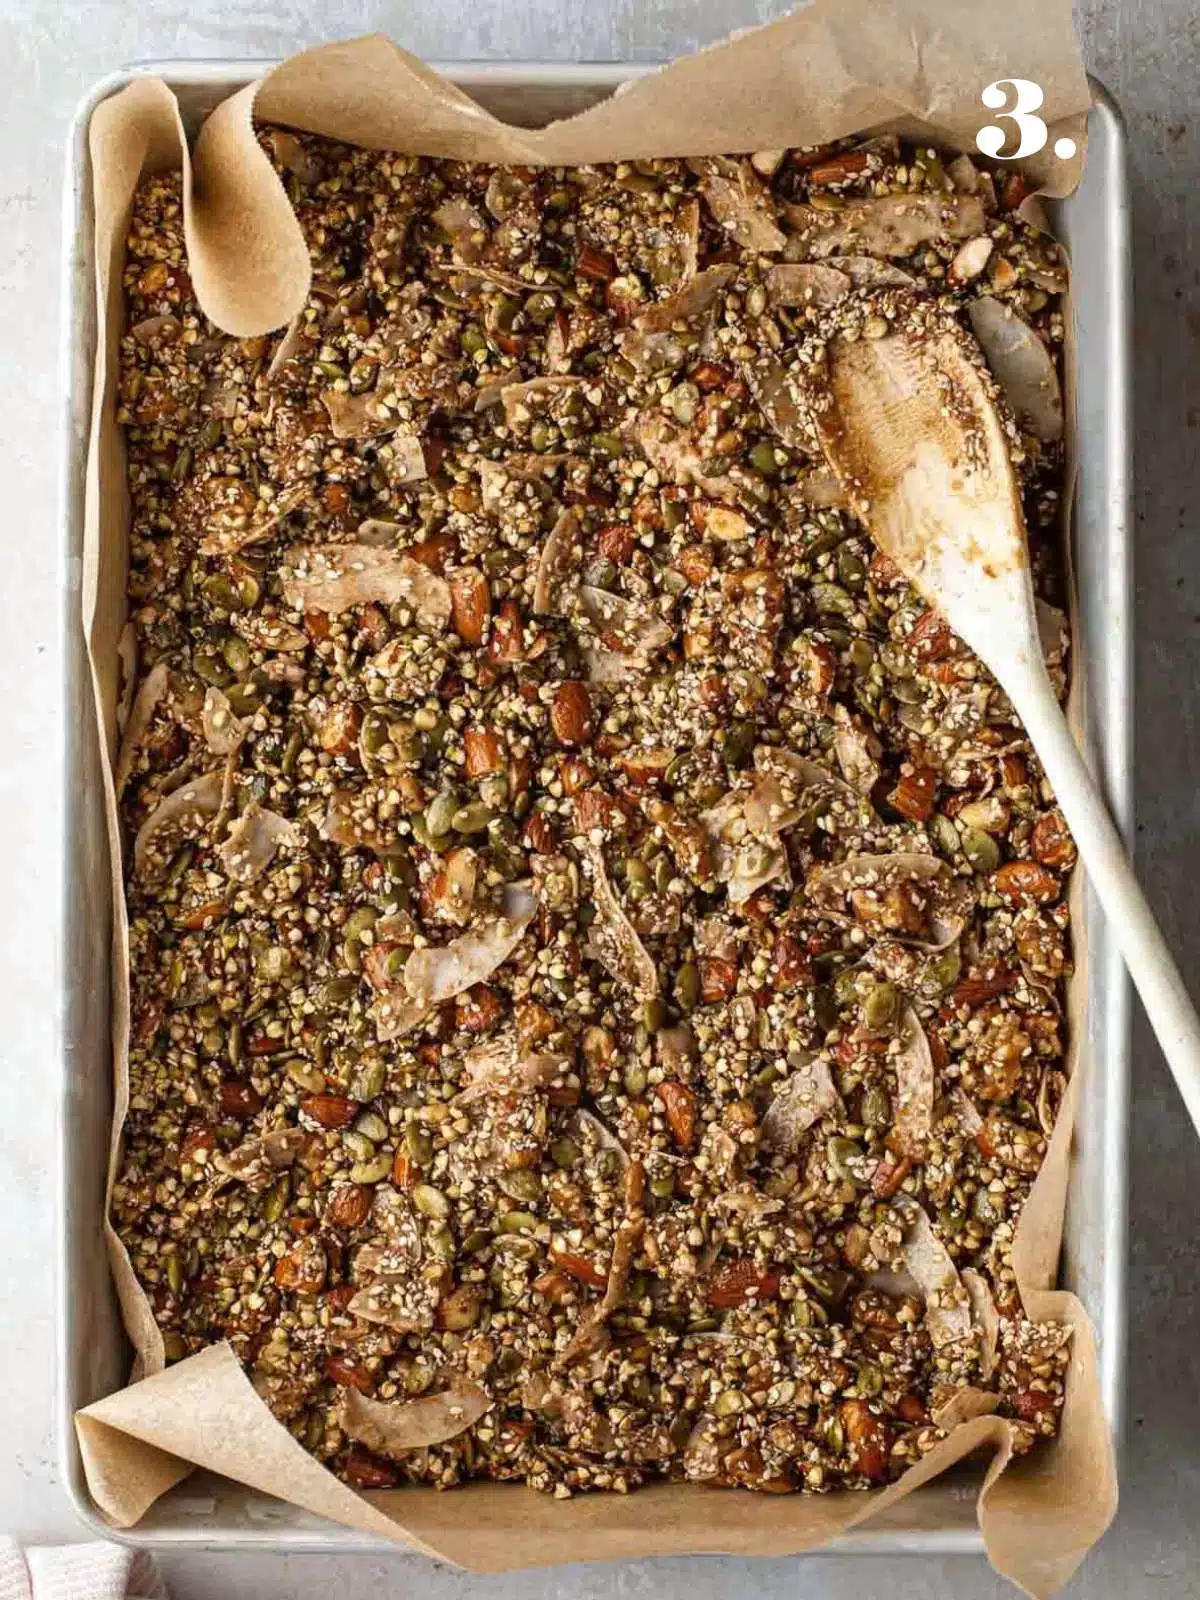 A close-up image of granola in a tray before baking.